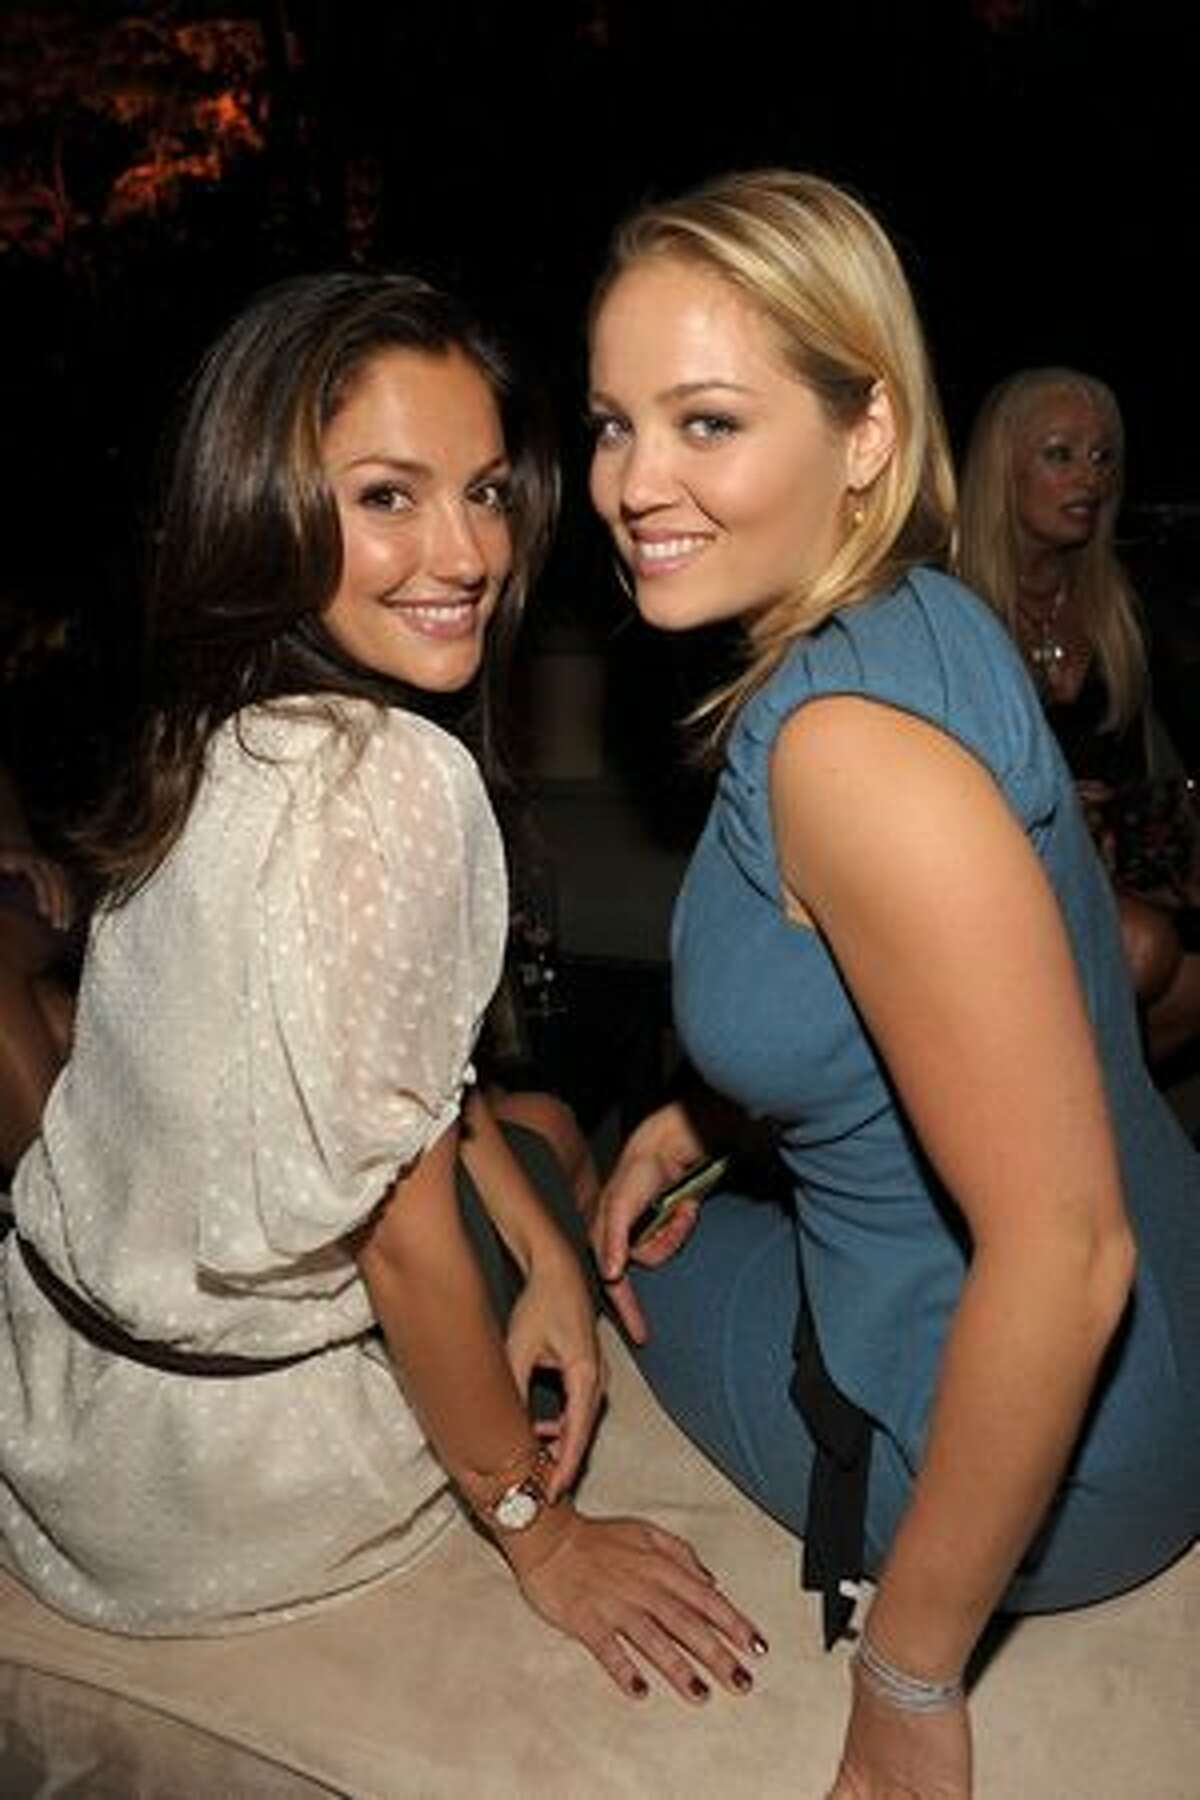 Actresses Minka Kelly (L) and Erika Christensen attend the 2010 Entertainment Weekly and Women In Film Pre-Emmy party sponsored by L'Oreal Paris at Restaurant at The Sunset Marquis Hotel on August 27, 2010 in West Hollywood, California.